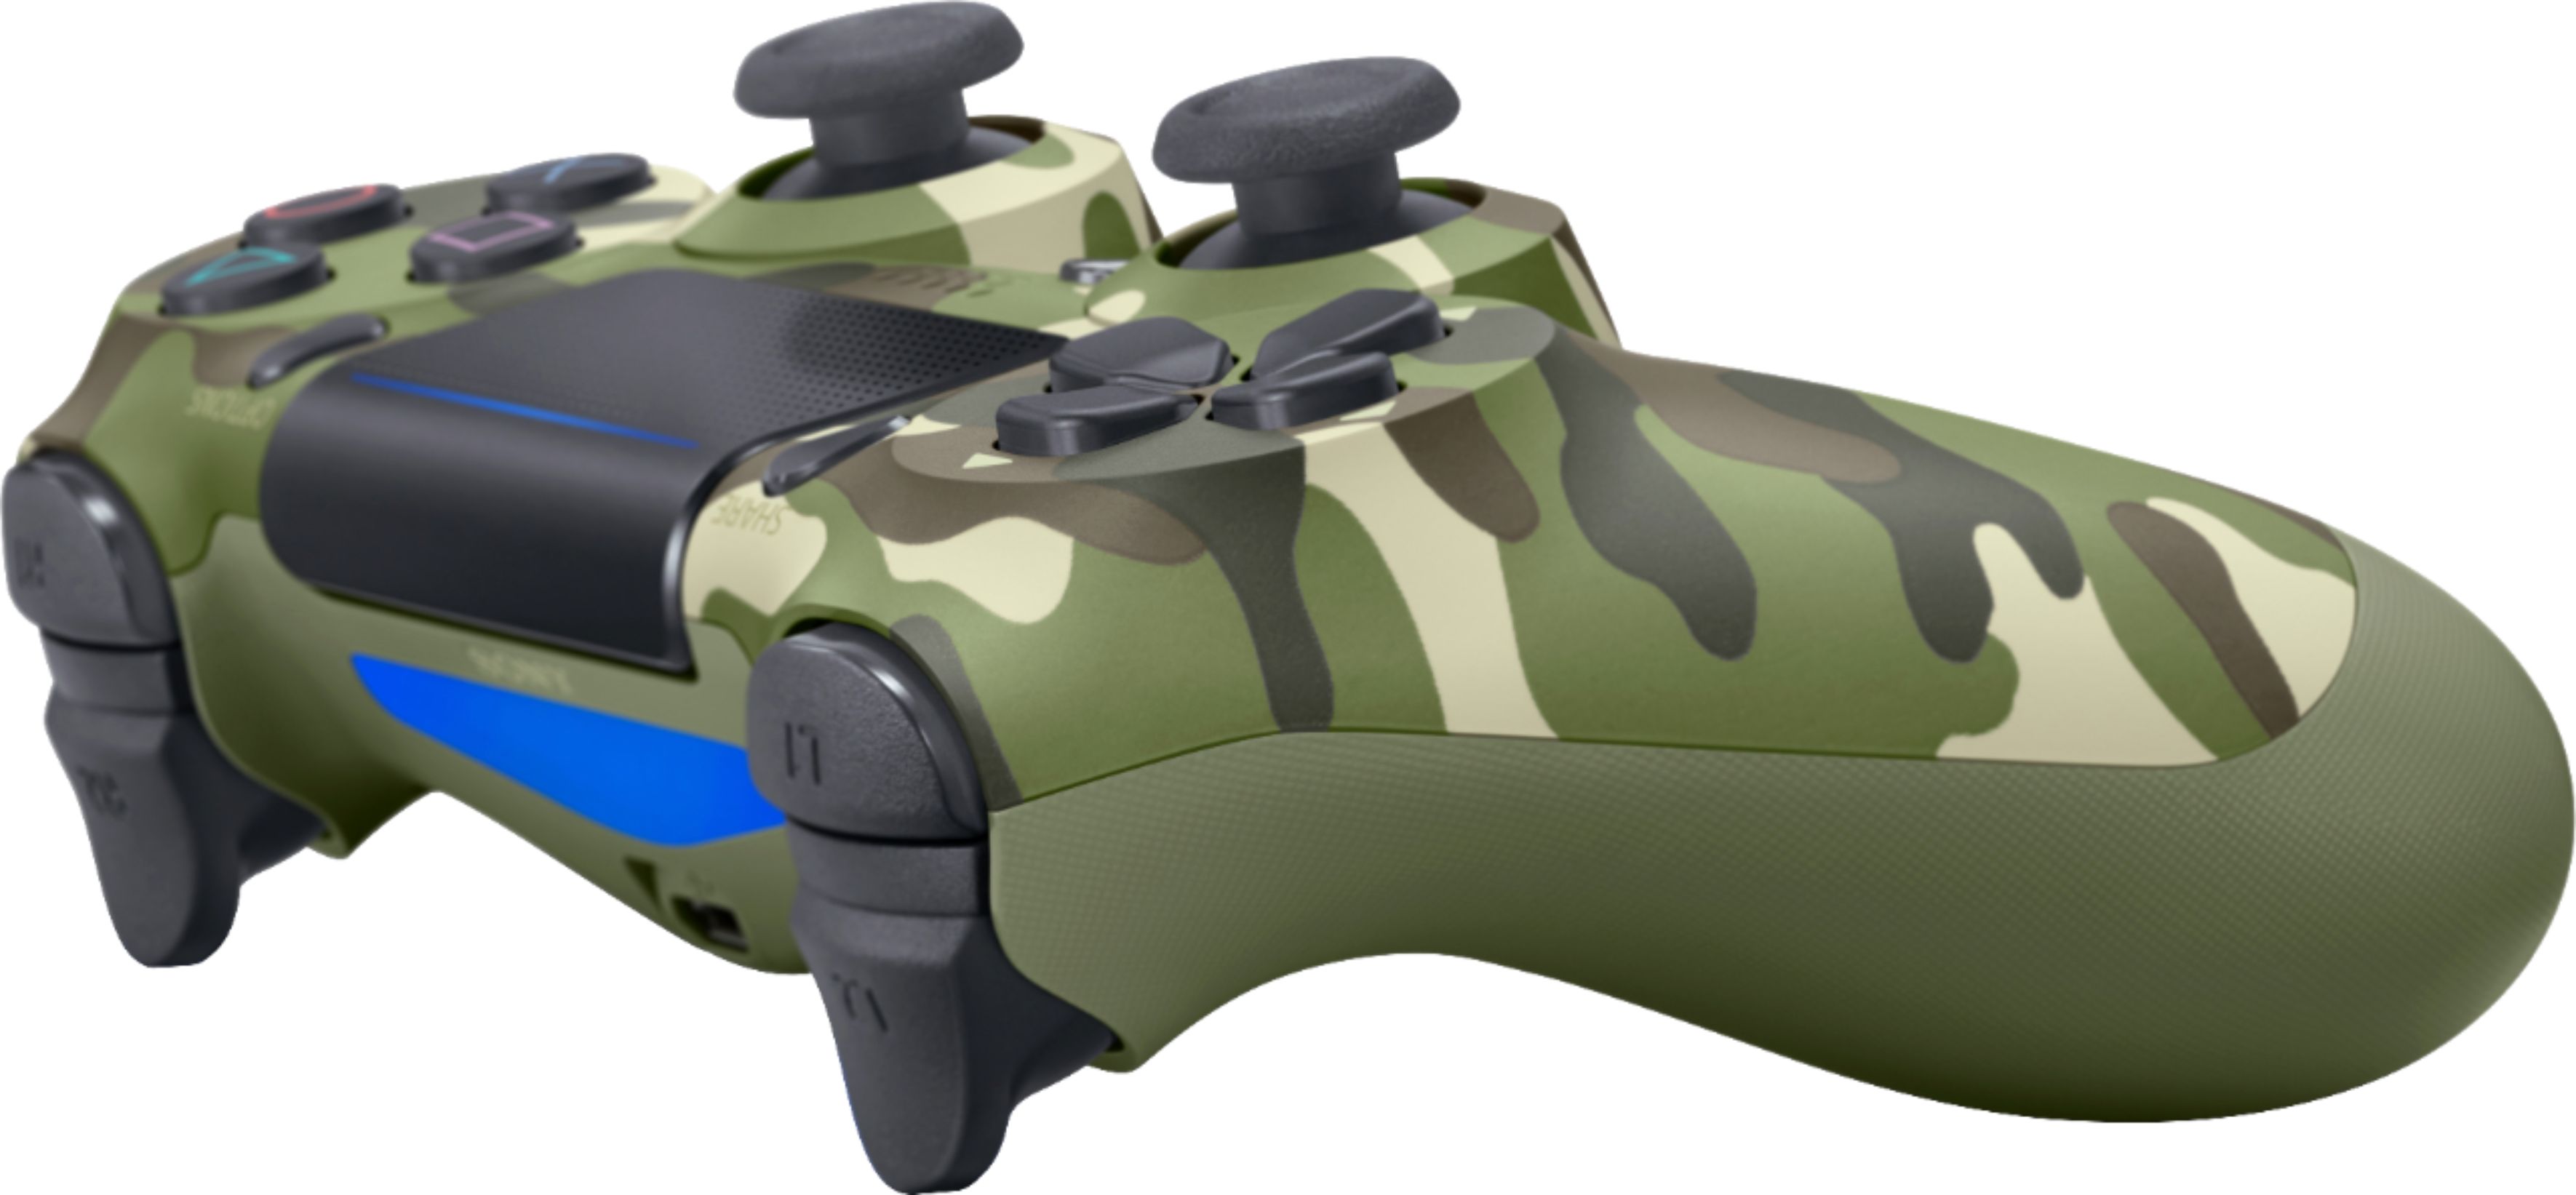 DualShock 4 Wireless Controller for Sony PlayStation 4 - Green Camouflage